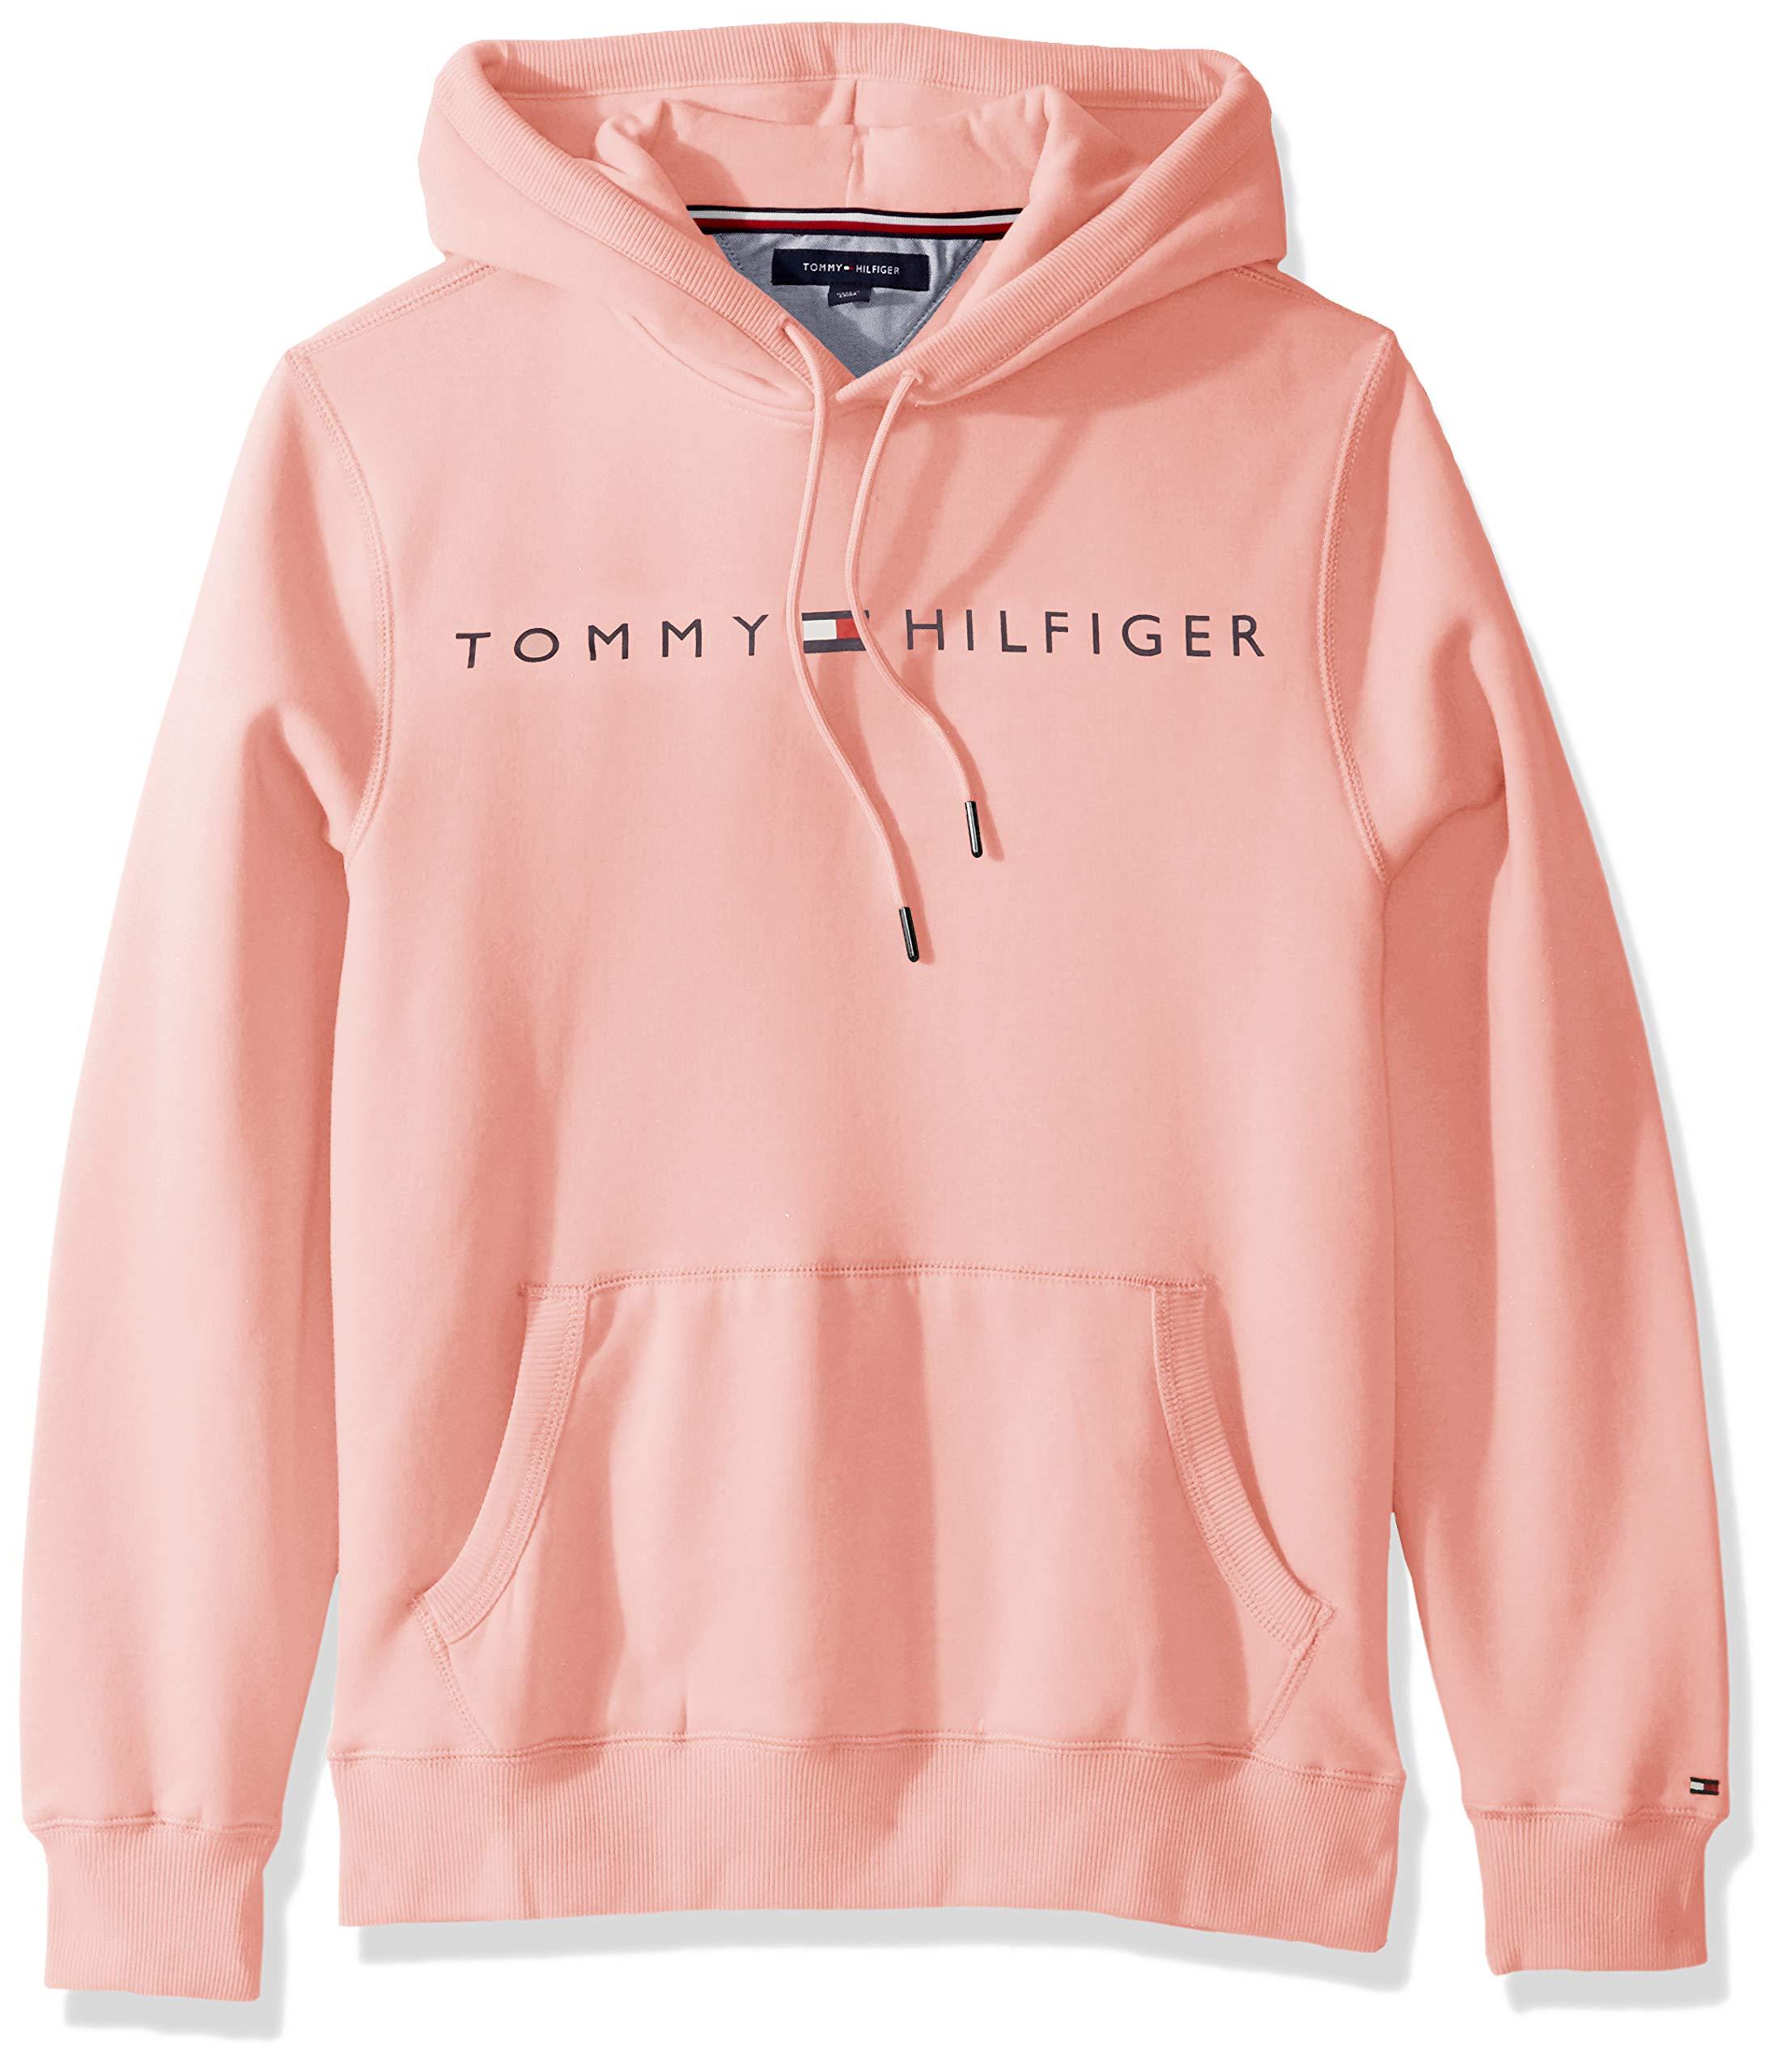 Tommy Hilfiger Men's Thd Hoodie Hooded Sweatshirt in Blossom (Pink) for Men  - Save 18% - Lyst